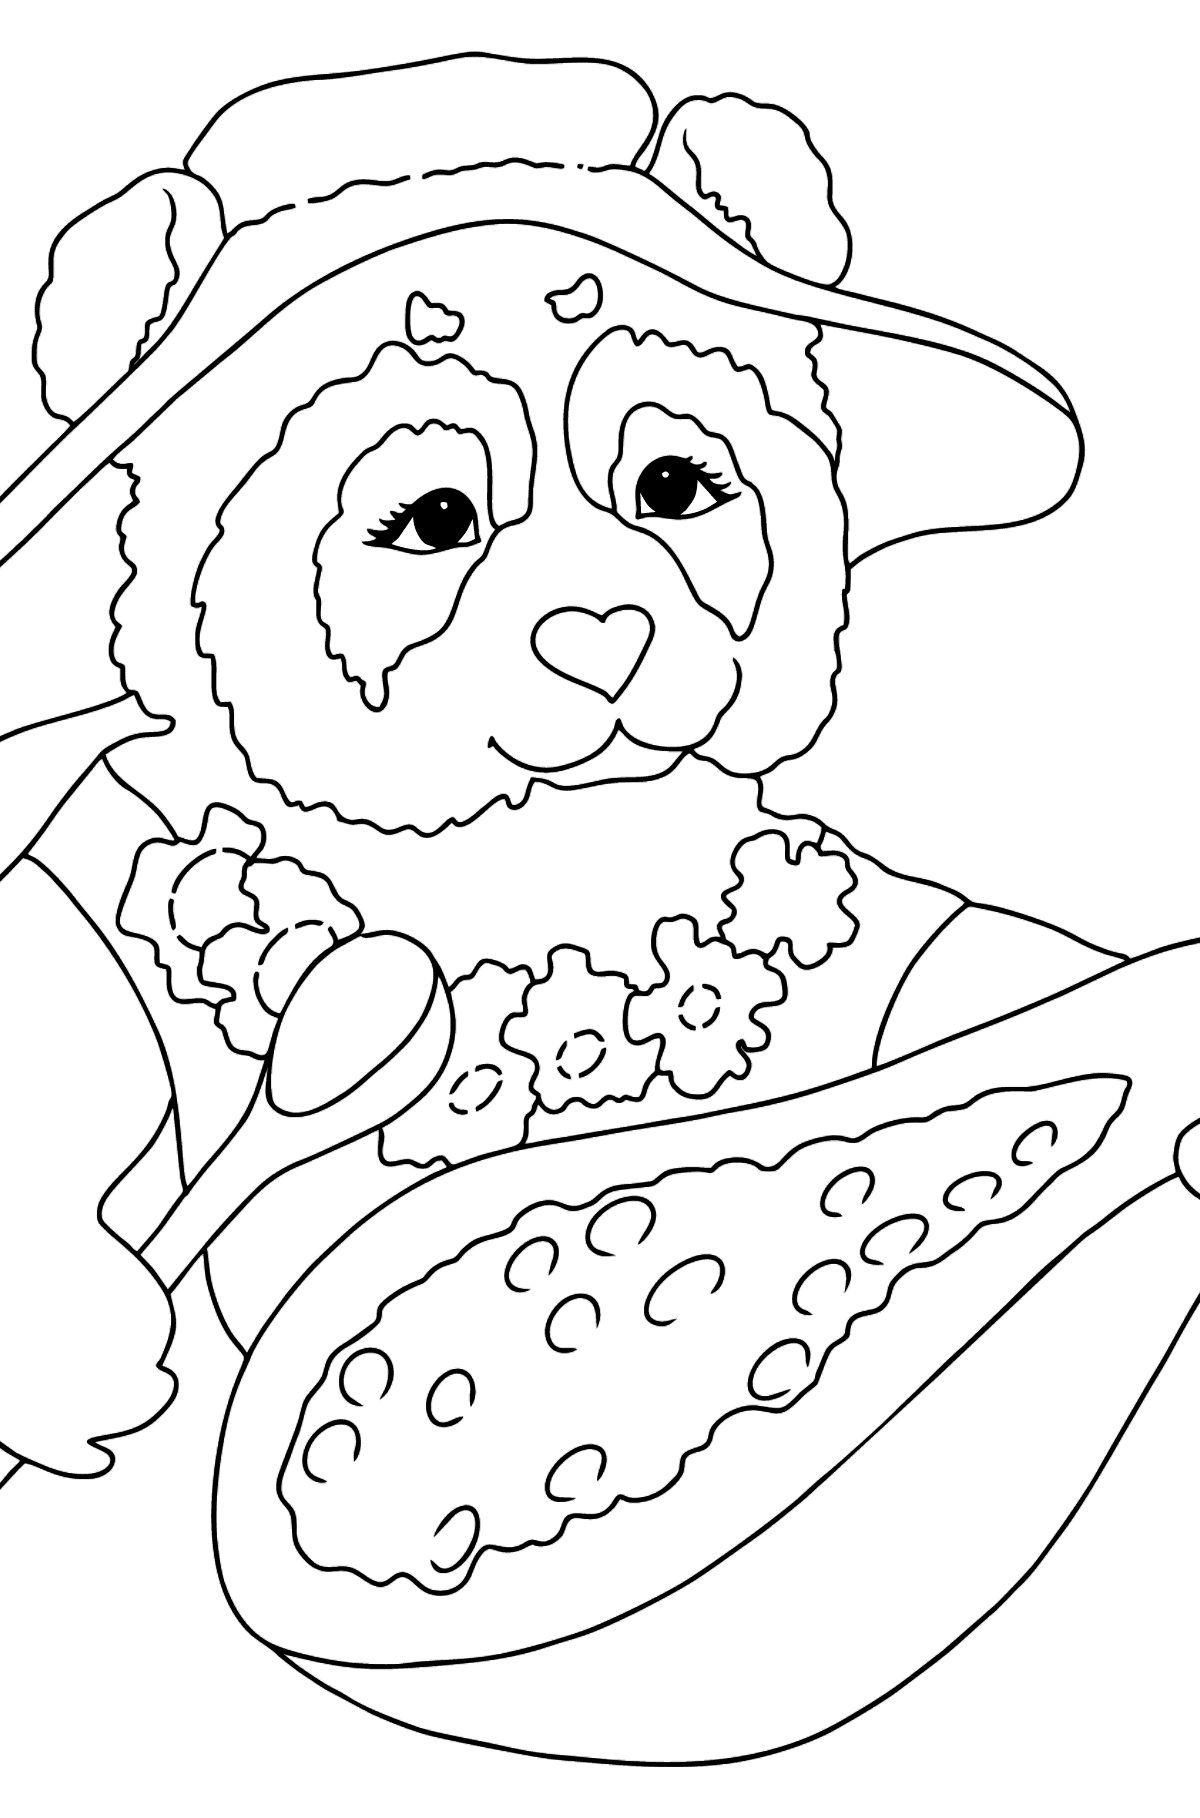 Cute Panda coloring page - Coloring Pages for Kids